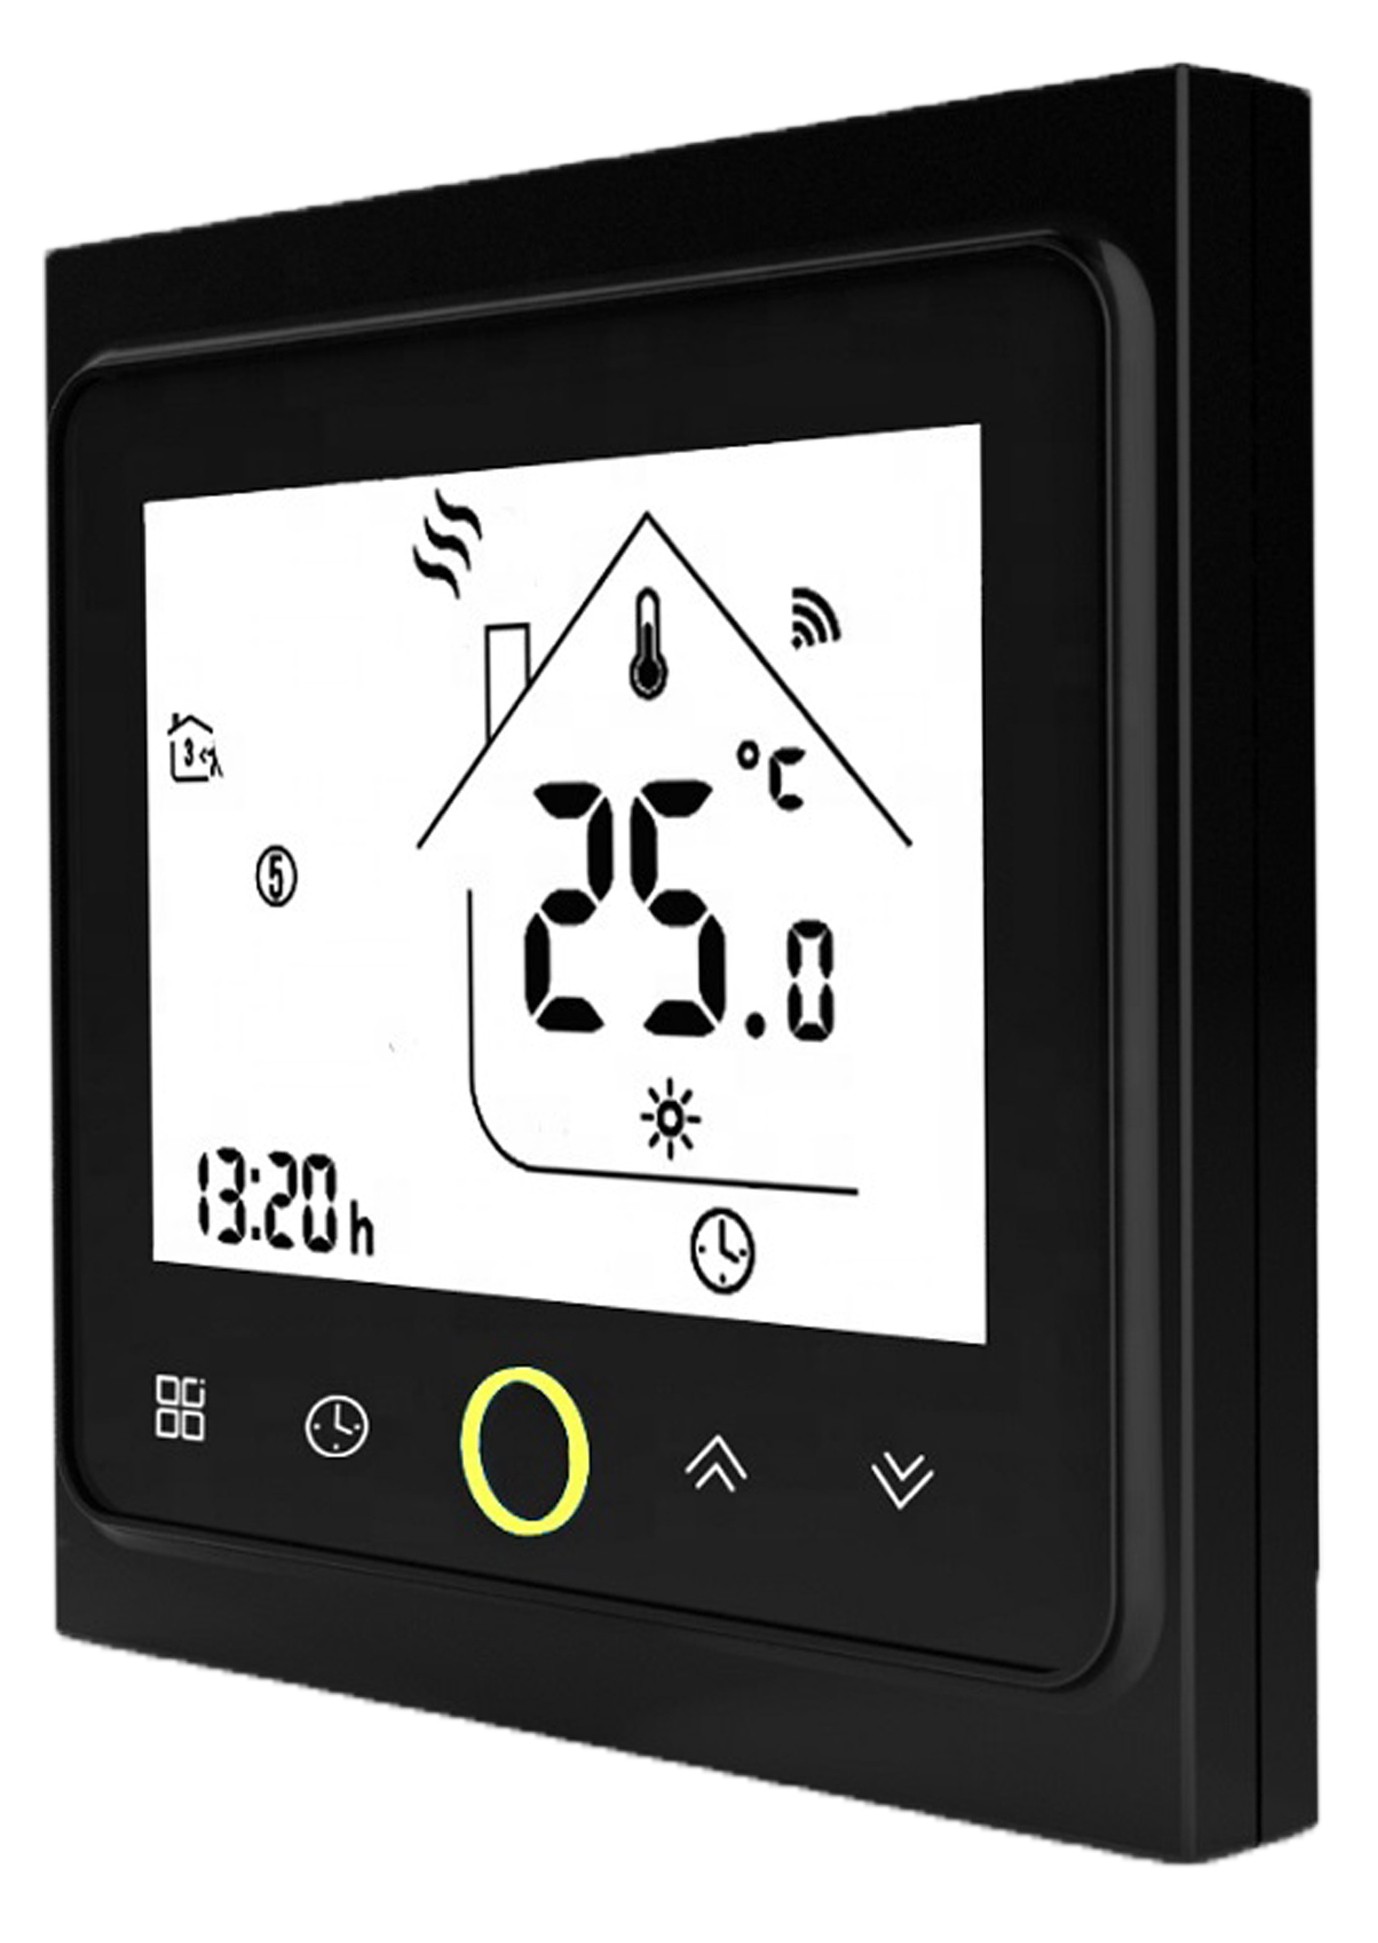 Tervix Pro Line WiFi Thermostat (114330)